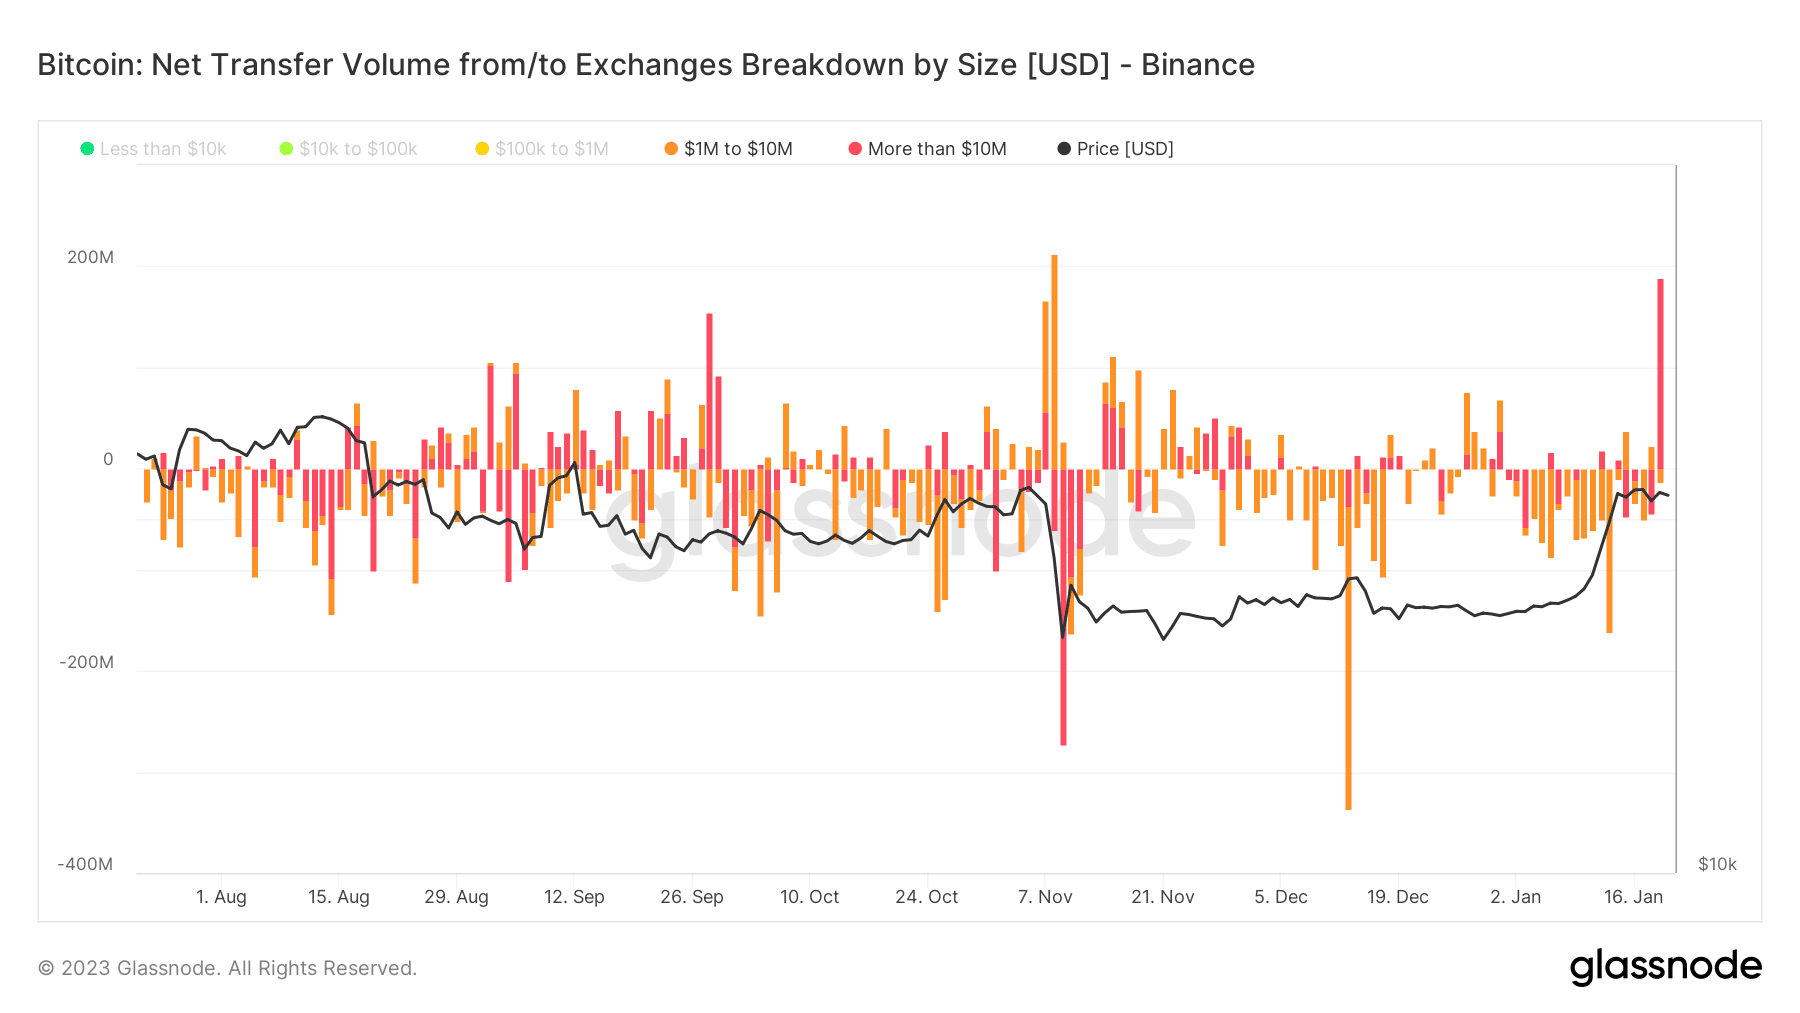 Bitcoin: Net Transfer Volume from/to Exchanges Breakdown by Size [USD]: (Source: Glassnode)